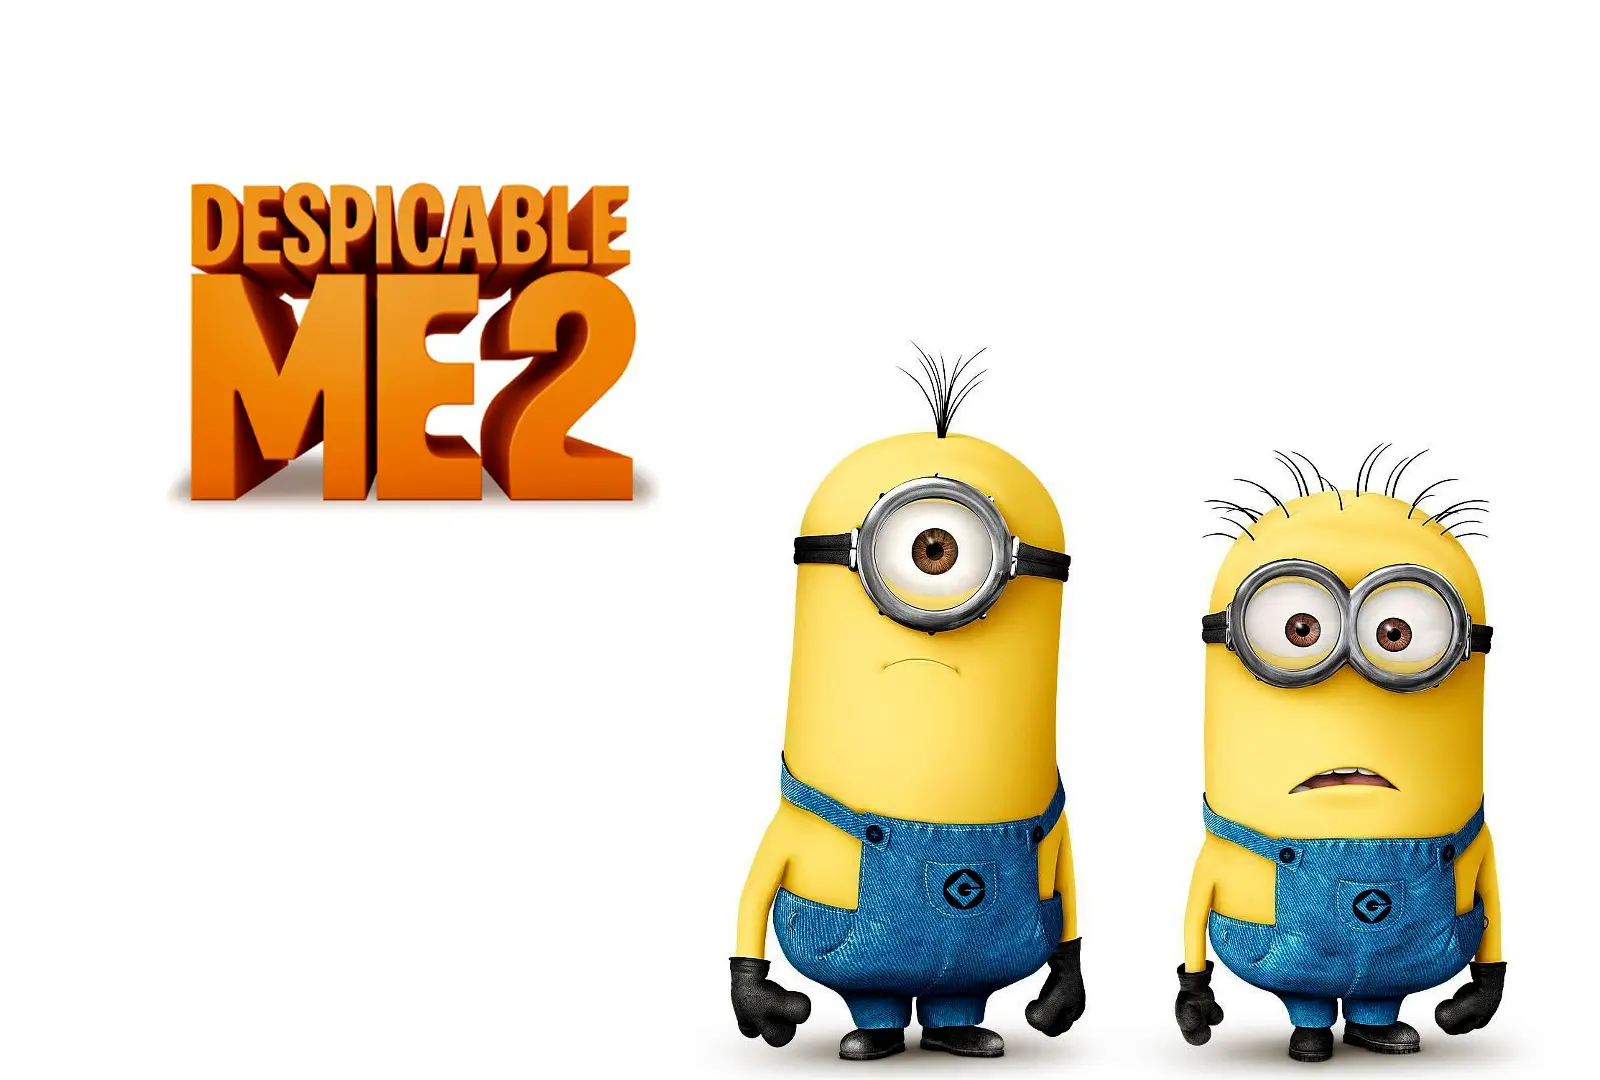 Movie Despicable me 2 wallpaper 2 | Background Image